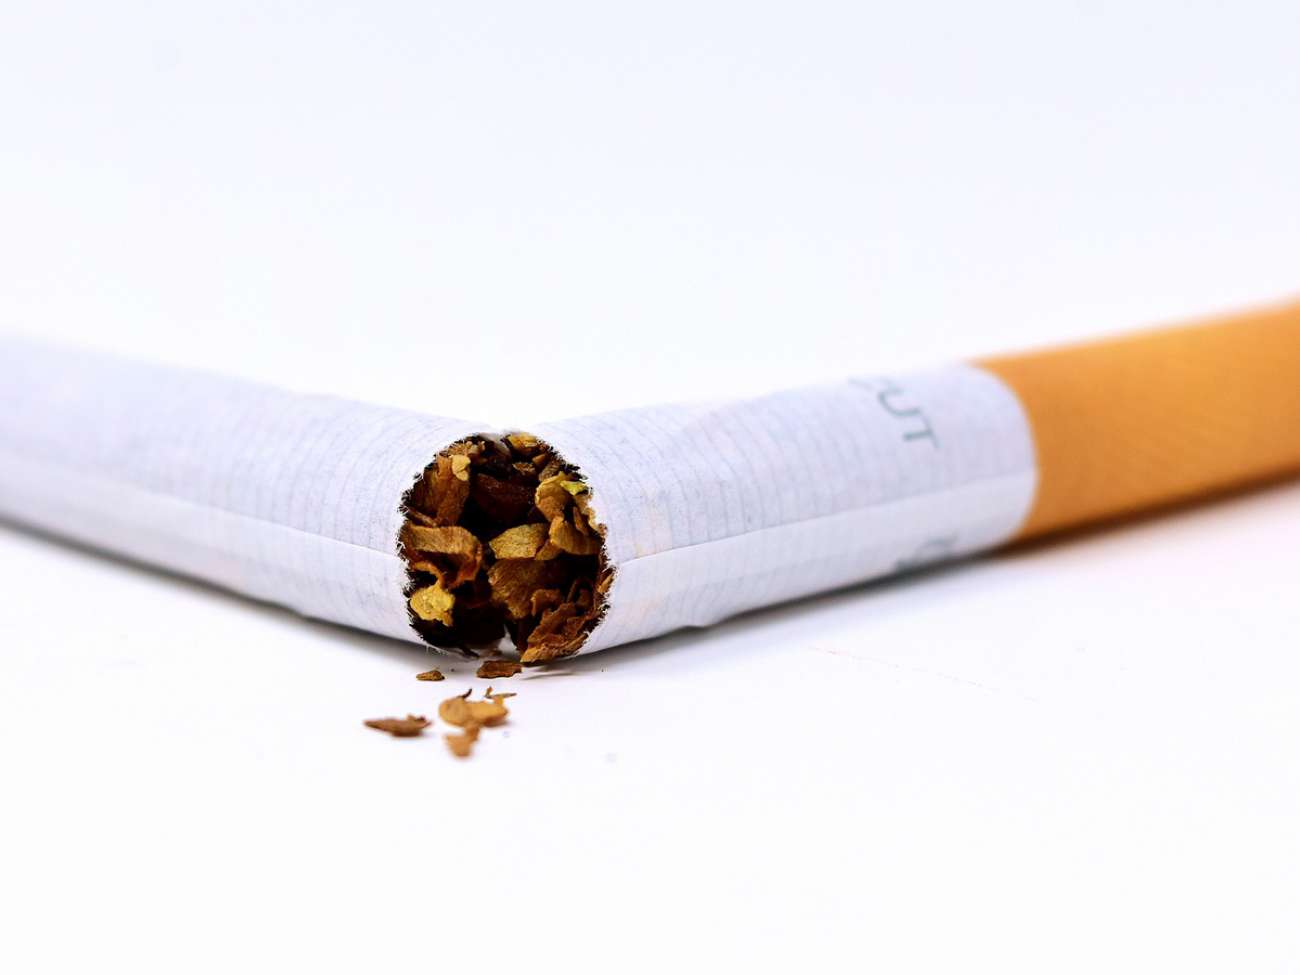 Smoking can clog the small arteries supplying your kidneys with cholesterol. For your health, kick the habit!